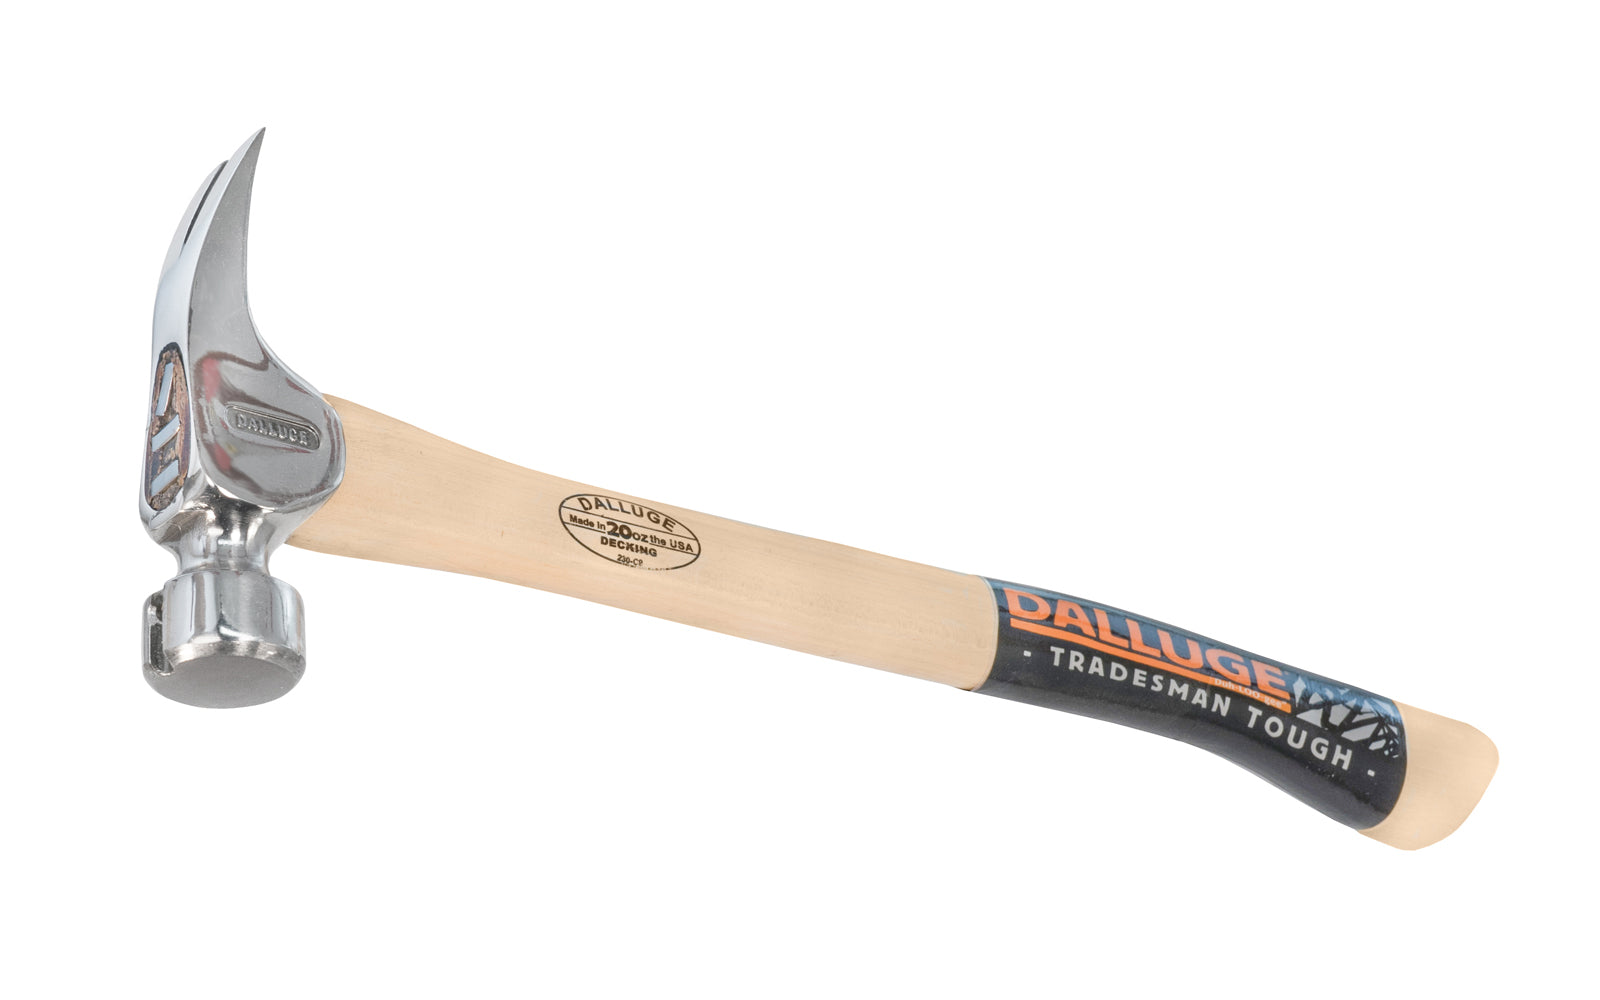 This 20 oz Dalluge Decking Hammer has a smooth face & "NaiLoc" magnetic nail holder as well. Curved Hickory hardwood handle. Model 2000C. 18" overall length. 698250020505